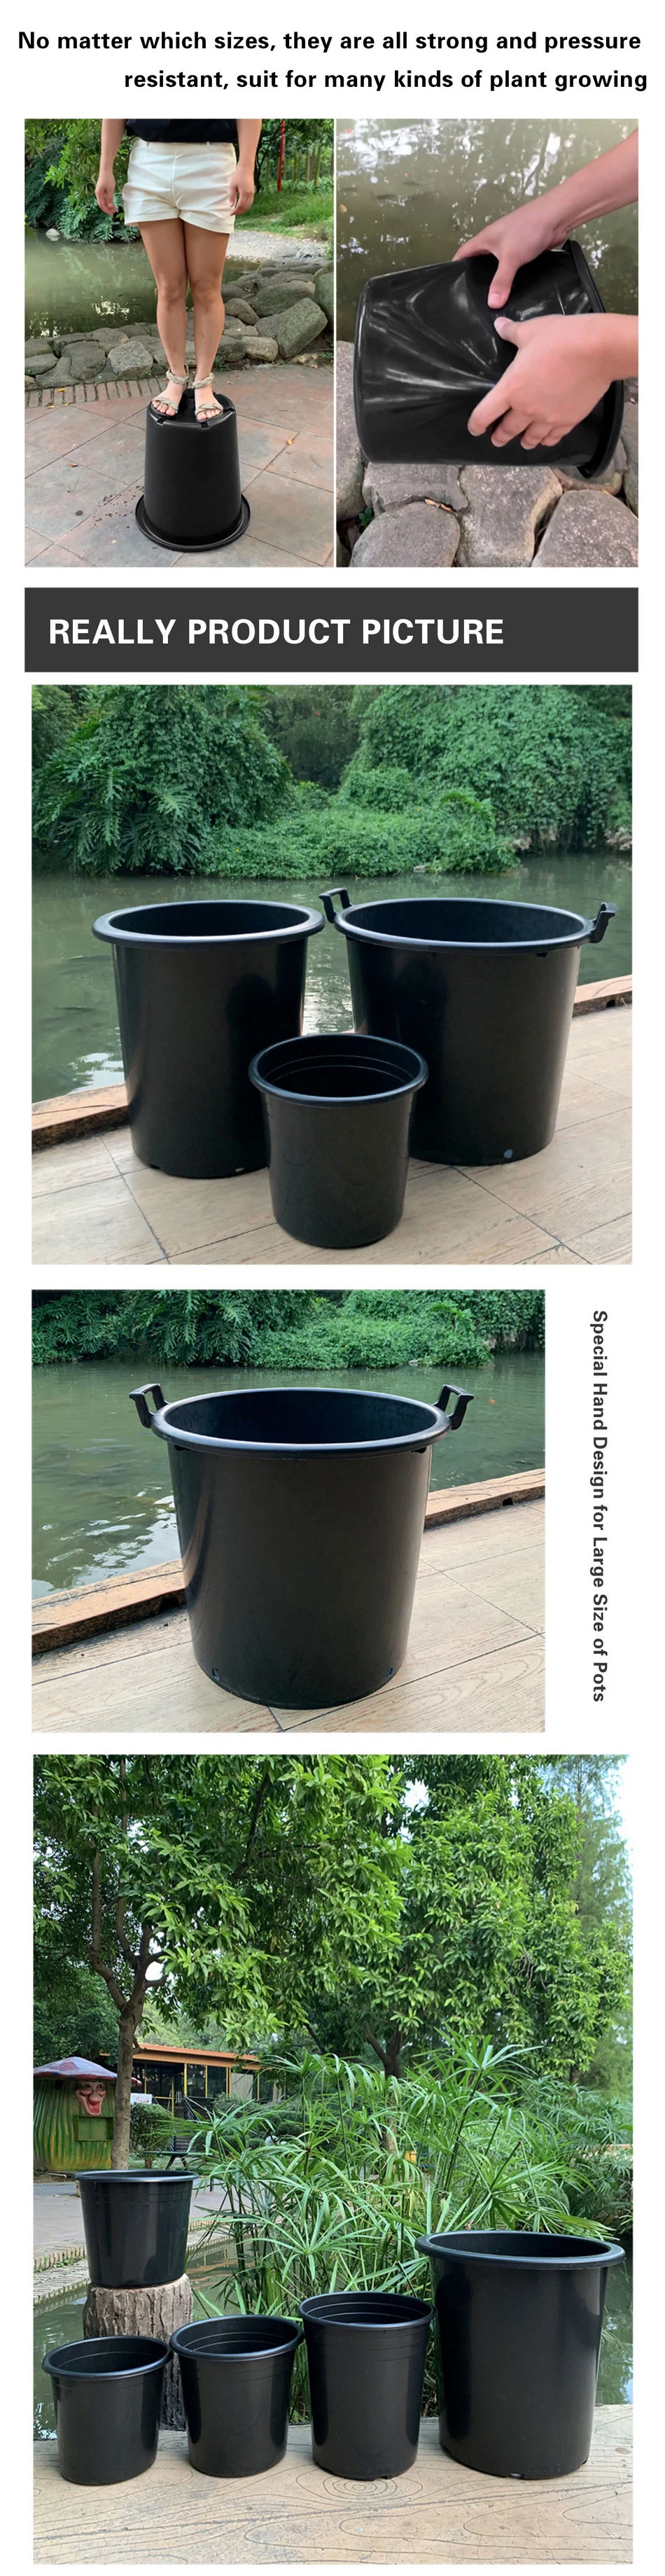 Black Thickened Plastic Injection Heavy Duty Sturdy Planter Flower Tree Grow Pot Outdoor From 2 to 50 Gallon for Plant Nursery Wholesale